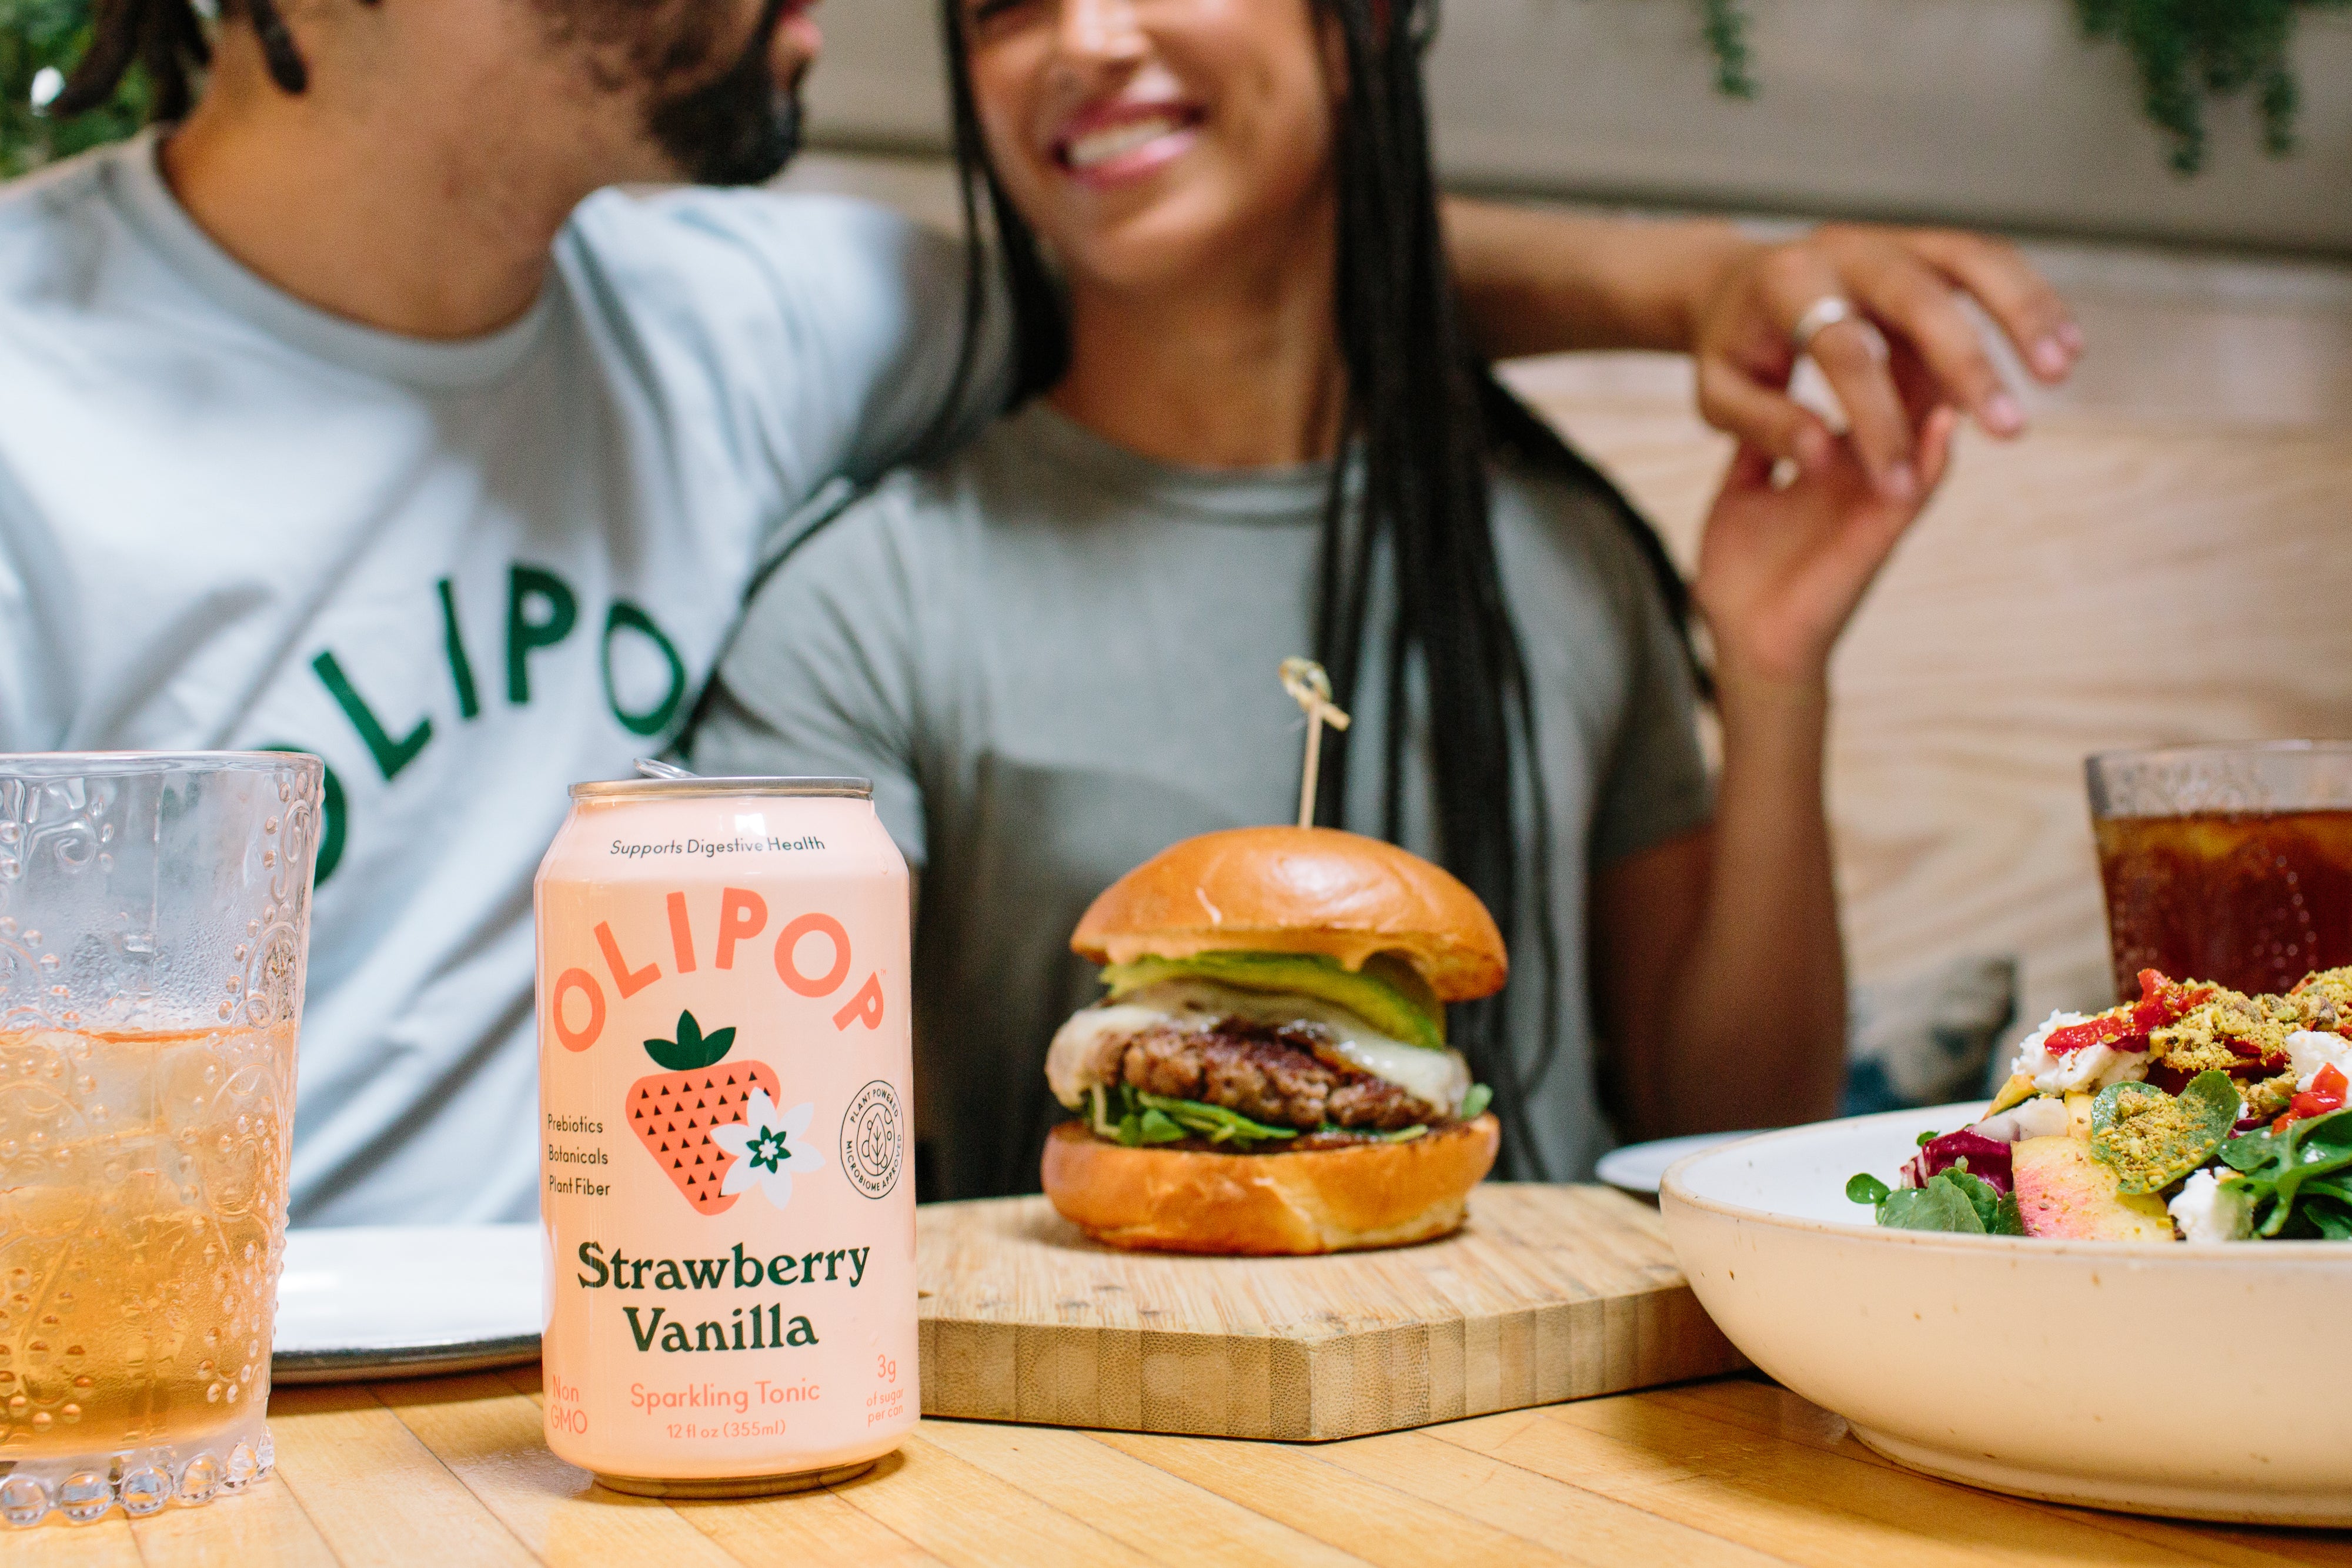 A couple embracing while sitting at a restaurant with a burger and a can of Olipop in front of them. 